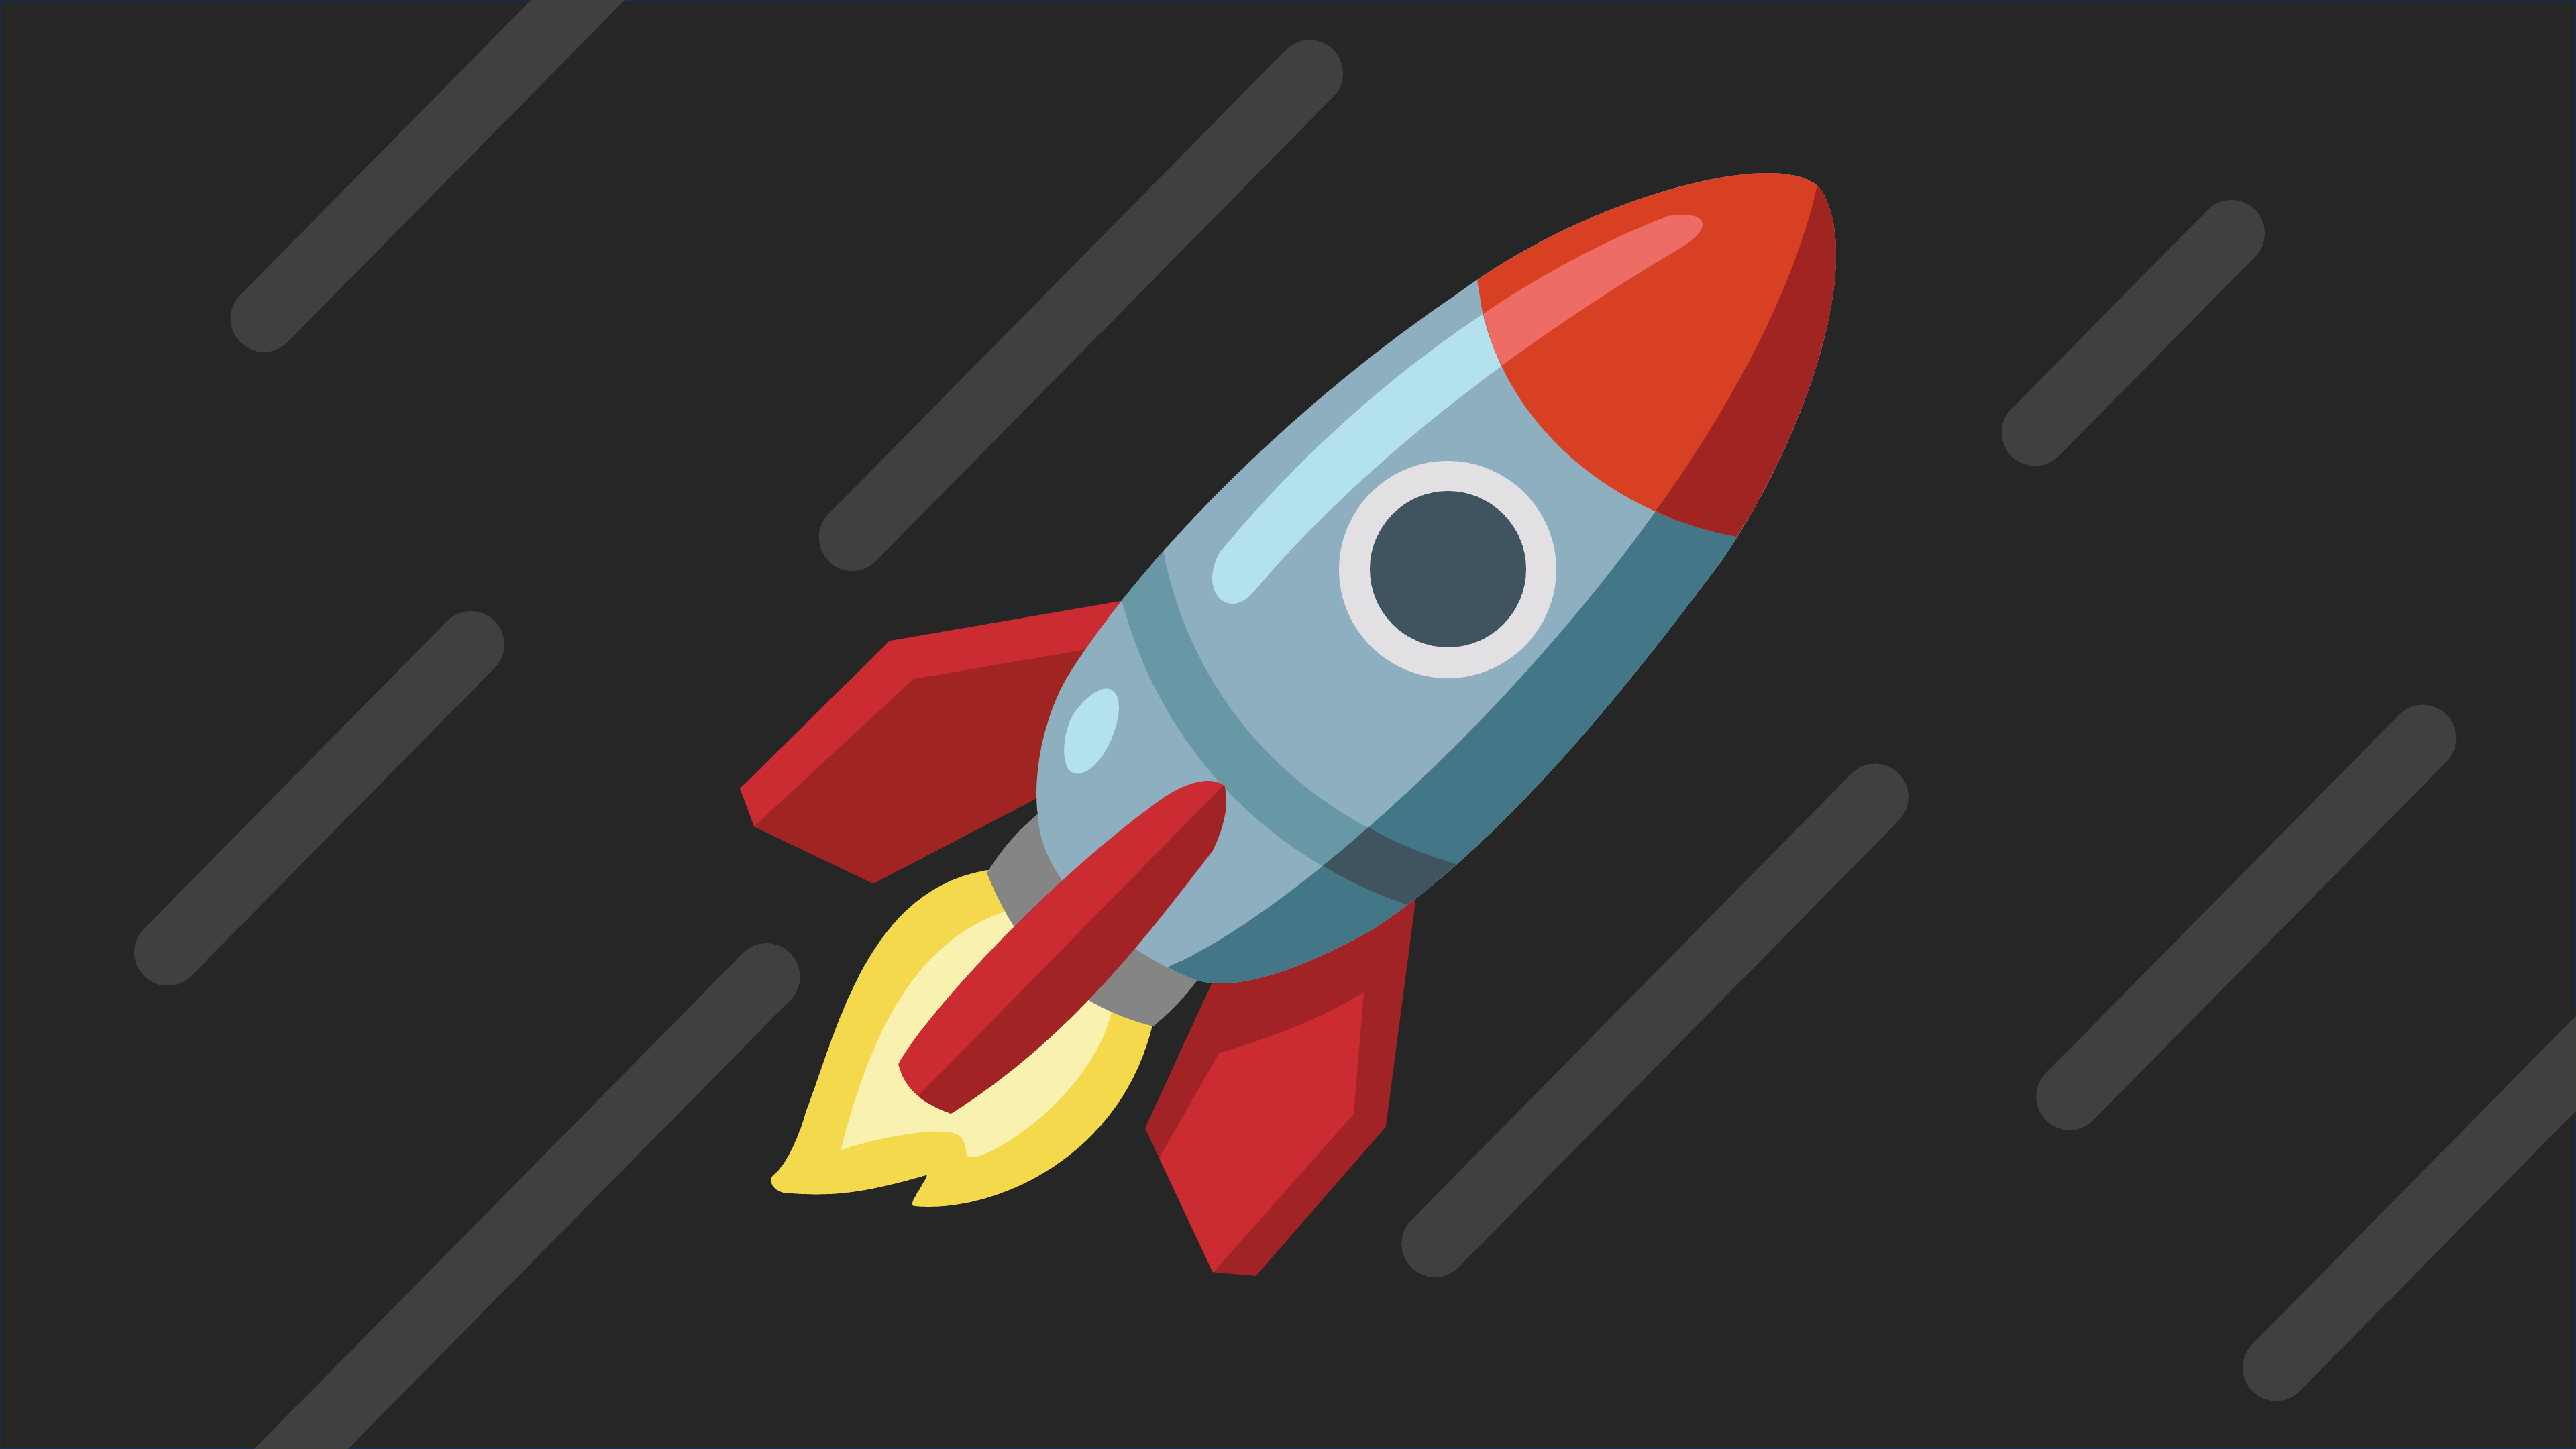 The rocket from the rocket emoji in space